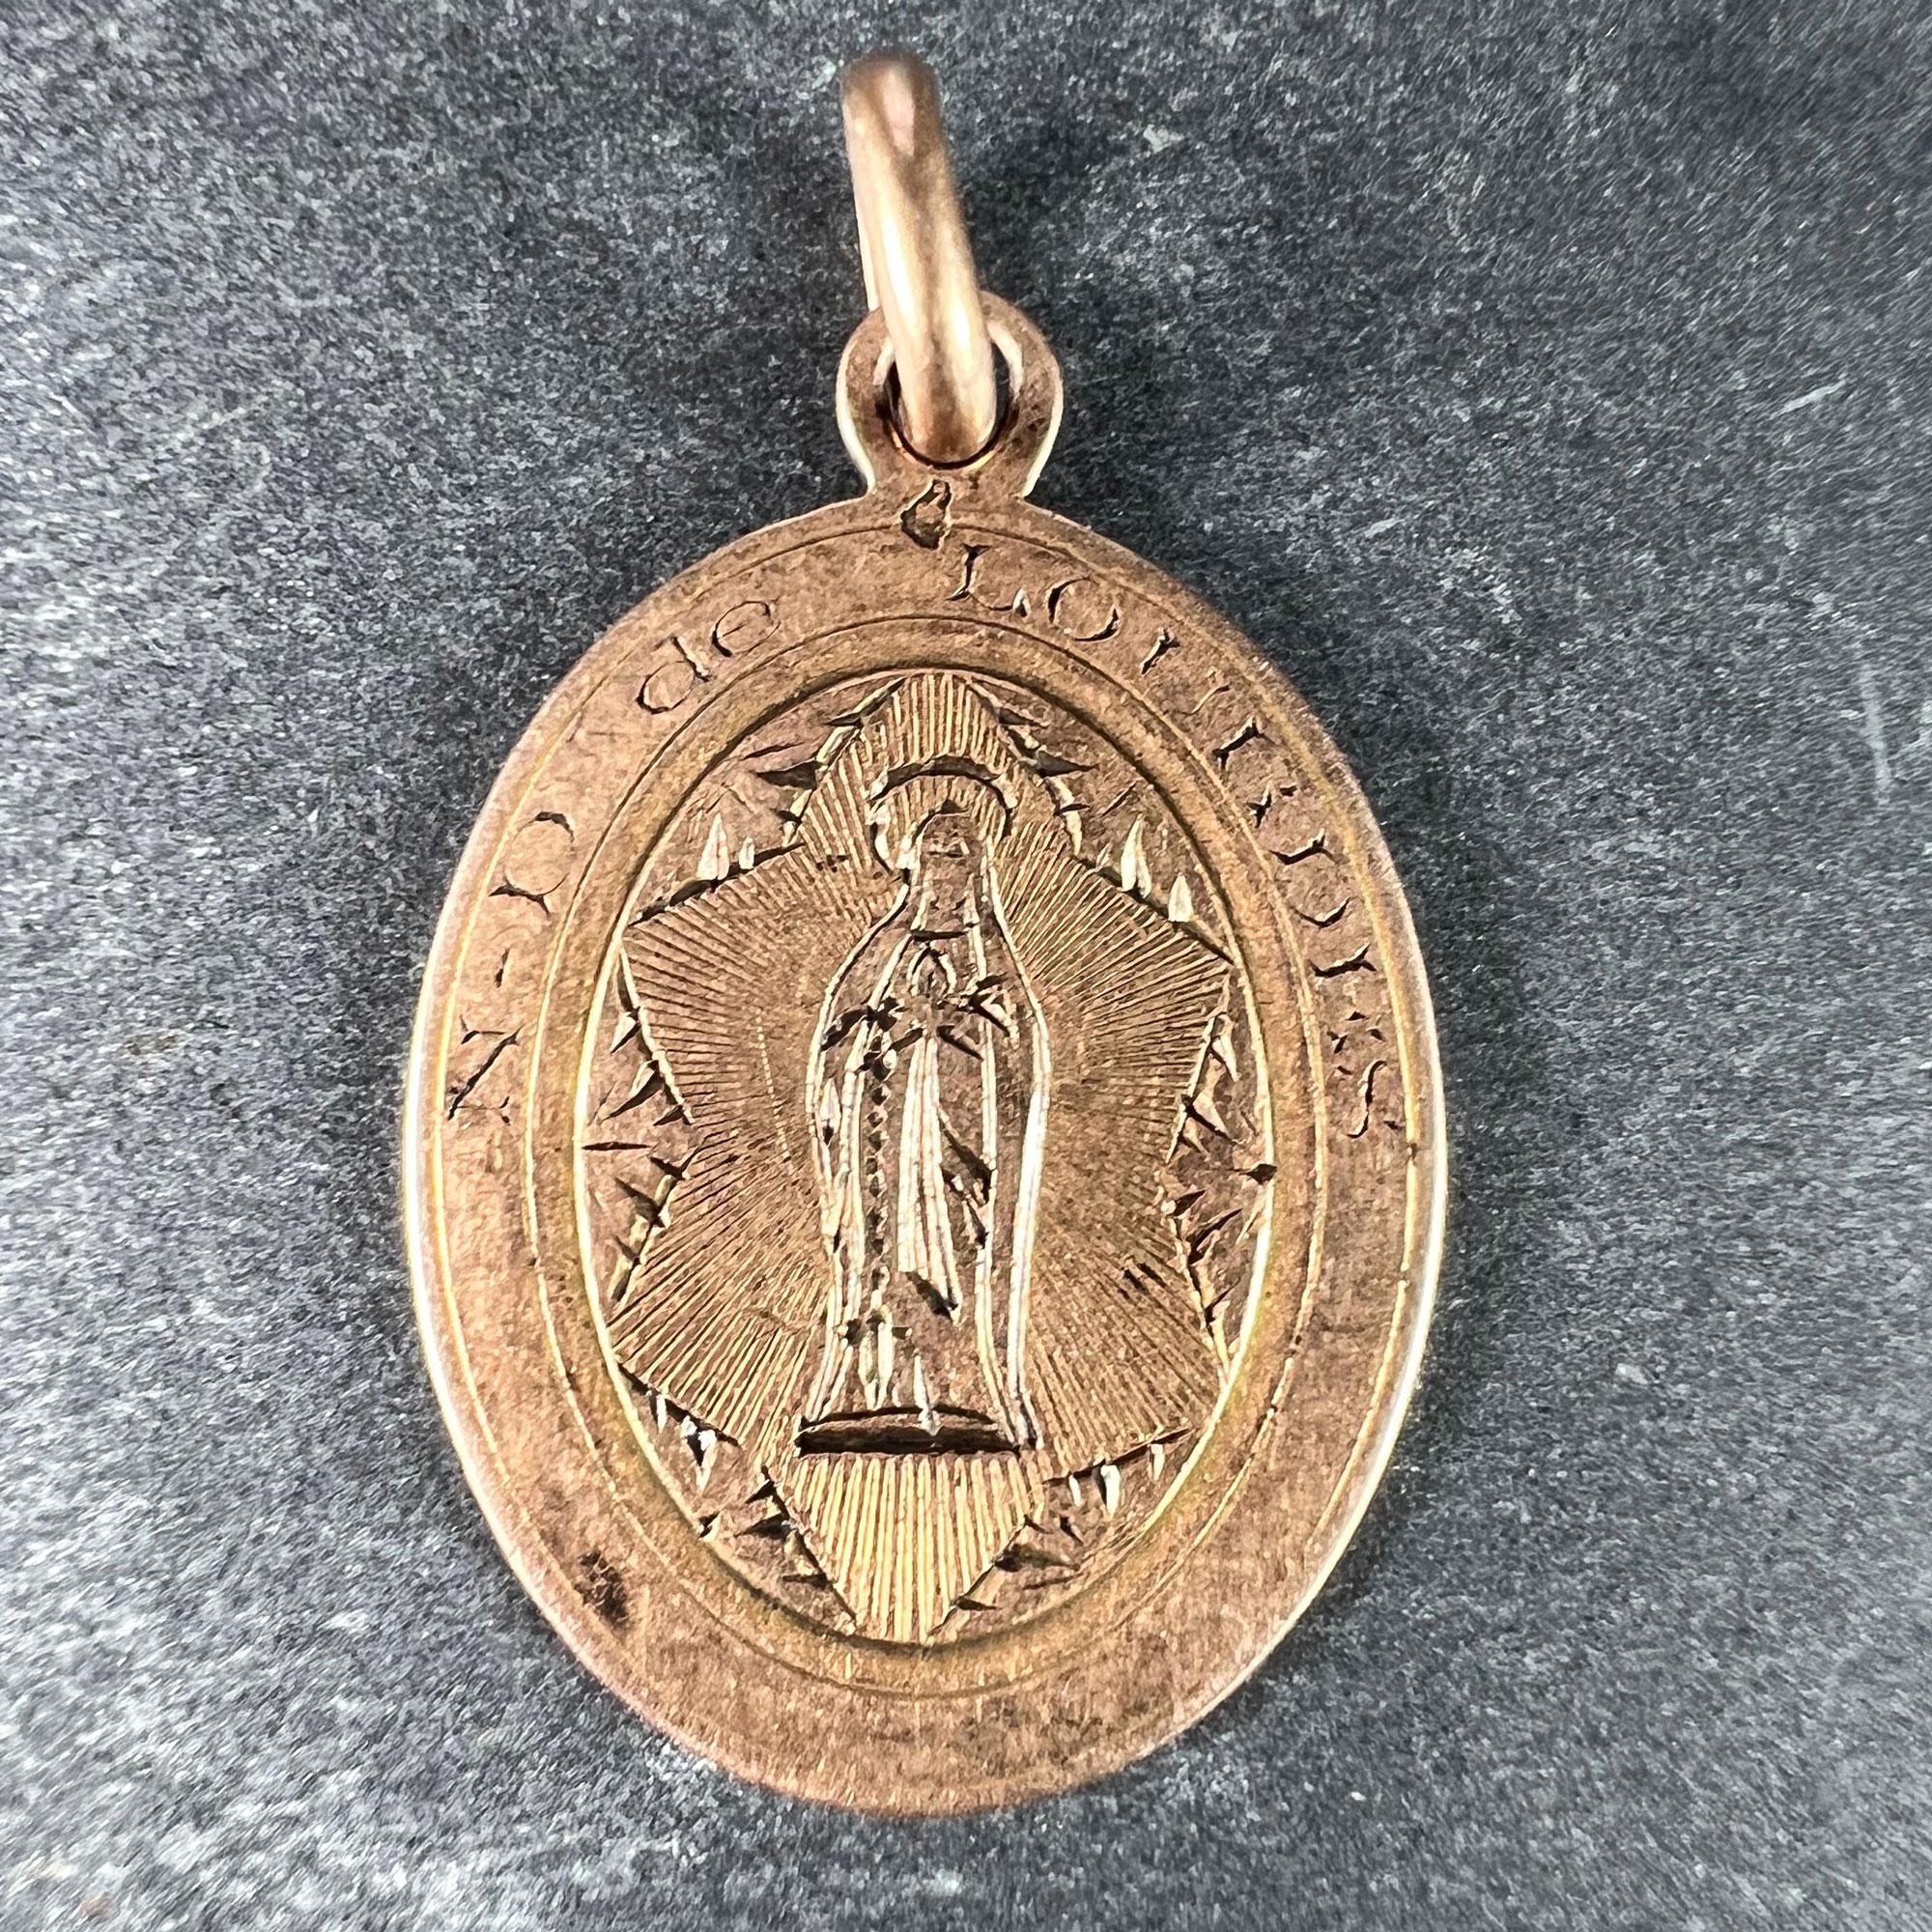 A French 18 karat (18K) rose gold charm pendant designed as an oval medal depicting the Virgin Mary within a frame engraved N-D de Lourdes for Notre Dame de Lourdes. Stamped with the horse's head for 18 karat gold and French (Lourdes) manufacture